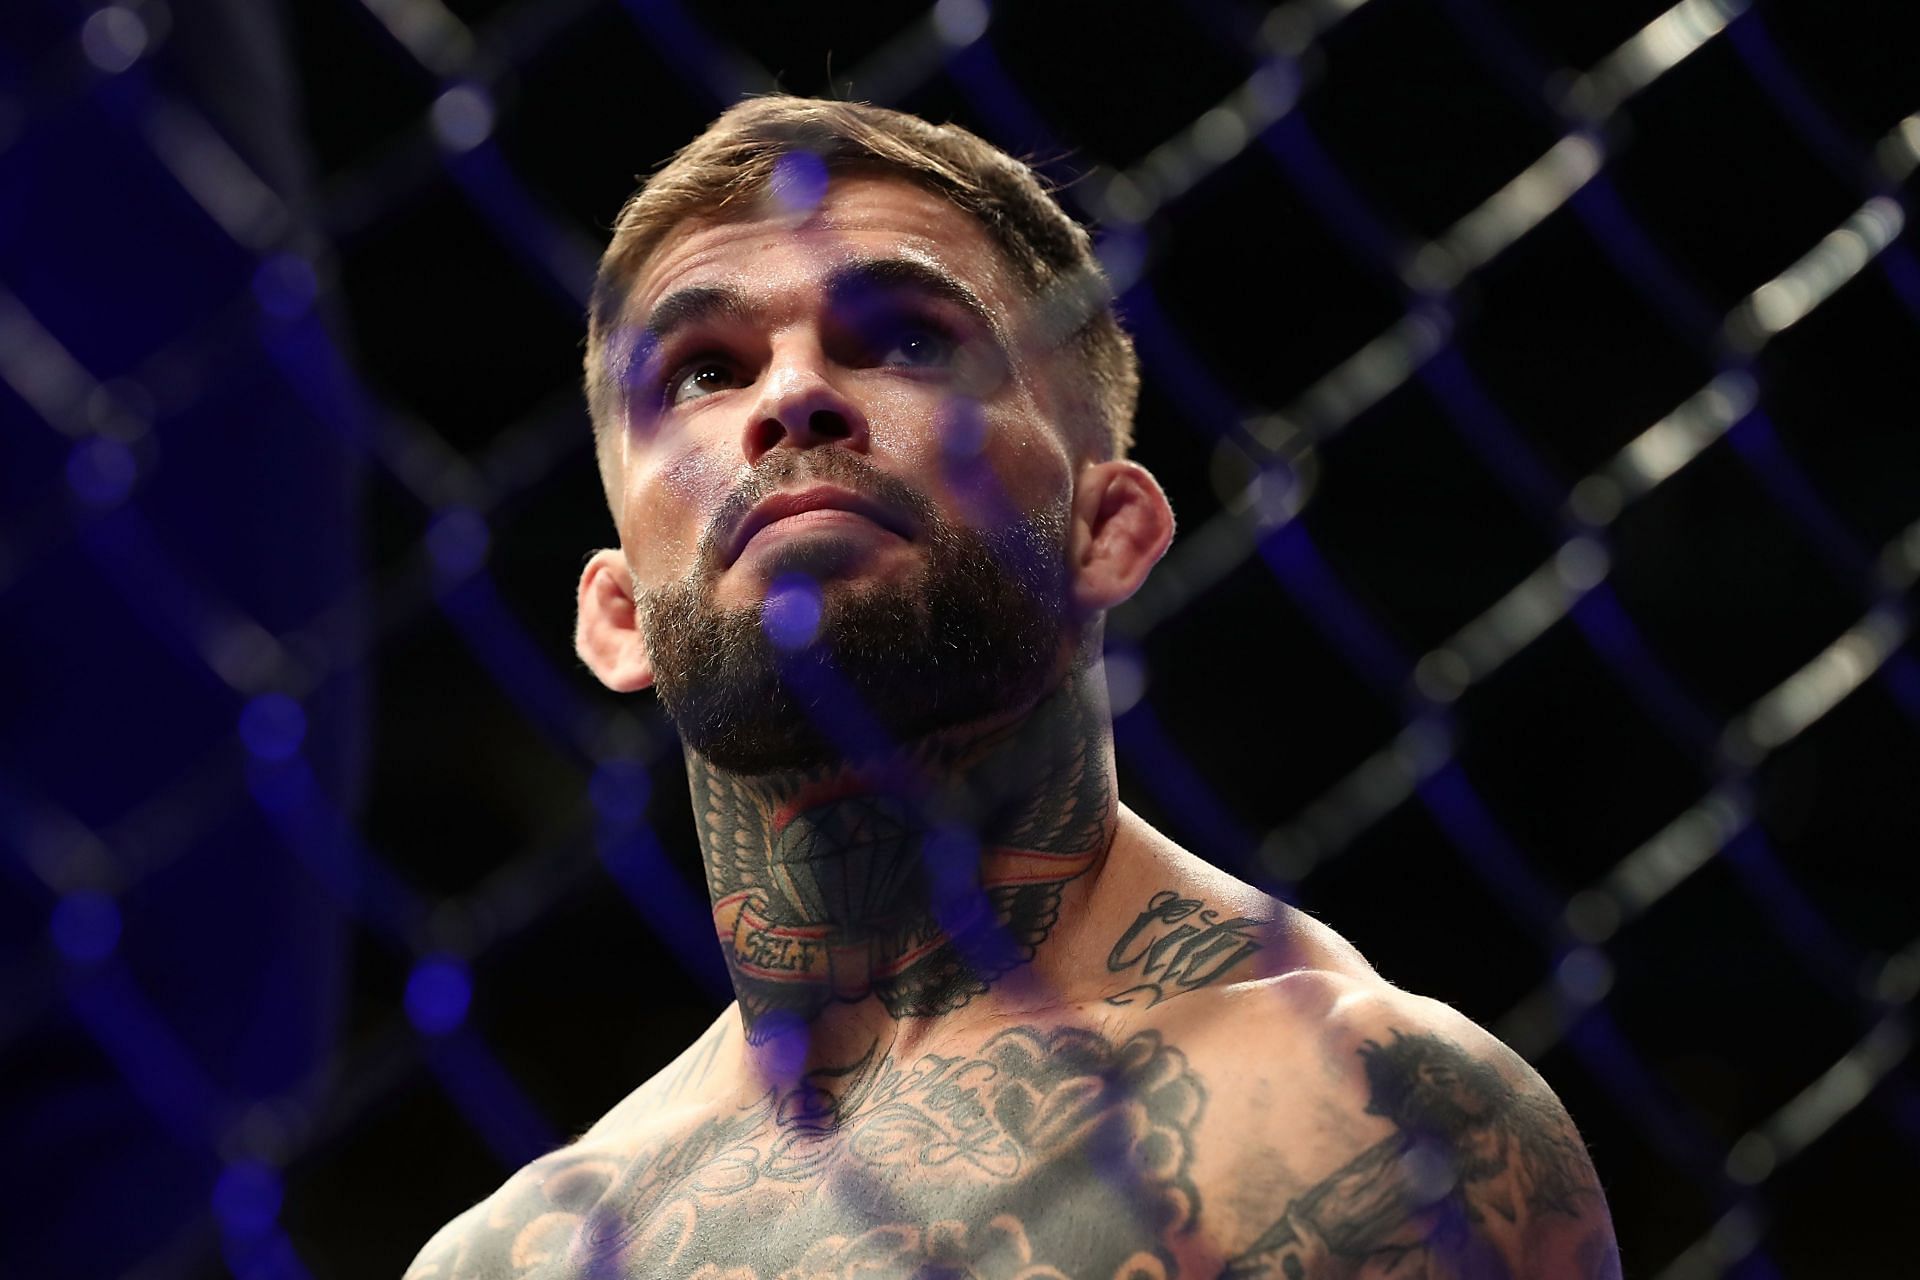 Cody Garbrandt&#039;s hot-headed nature has led him to some gaffes on the microphone